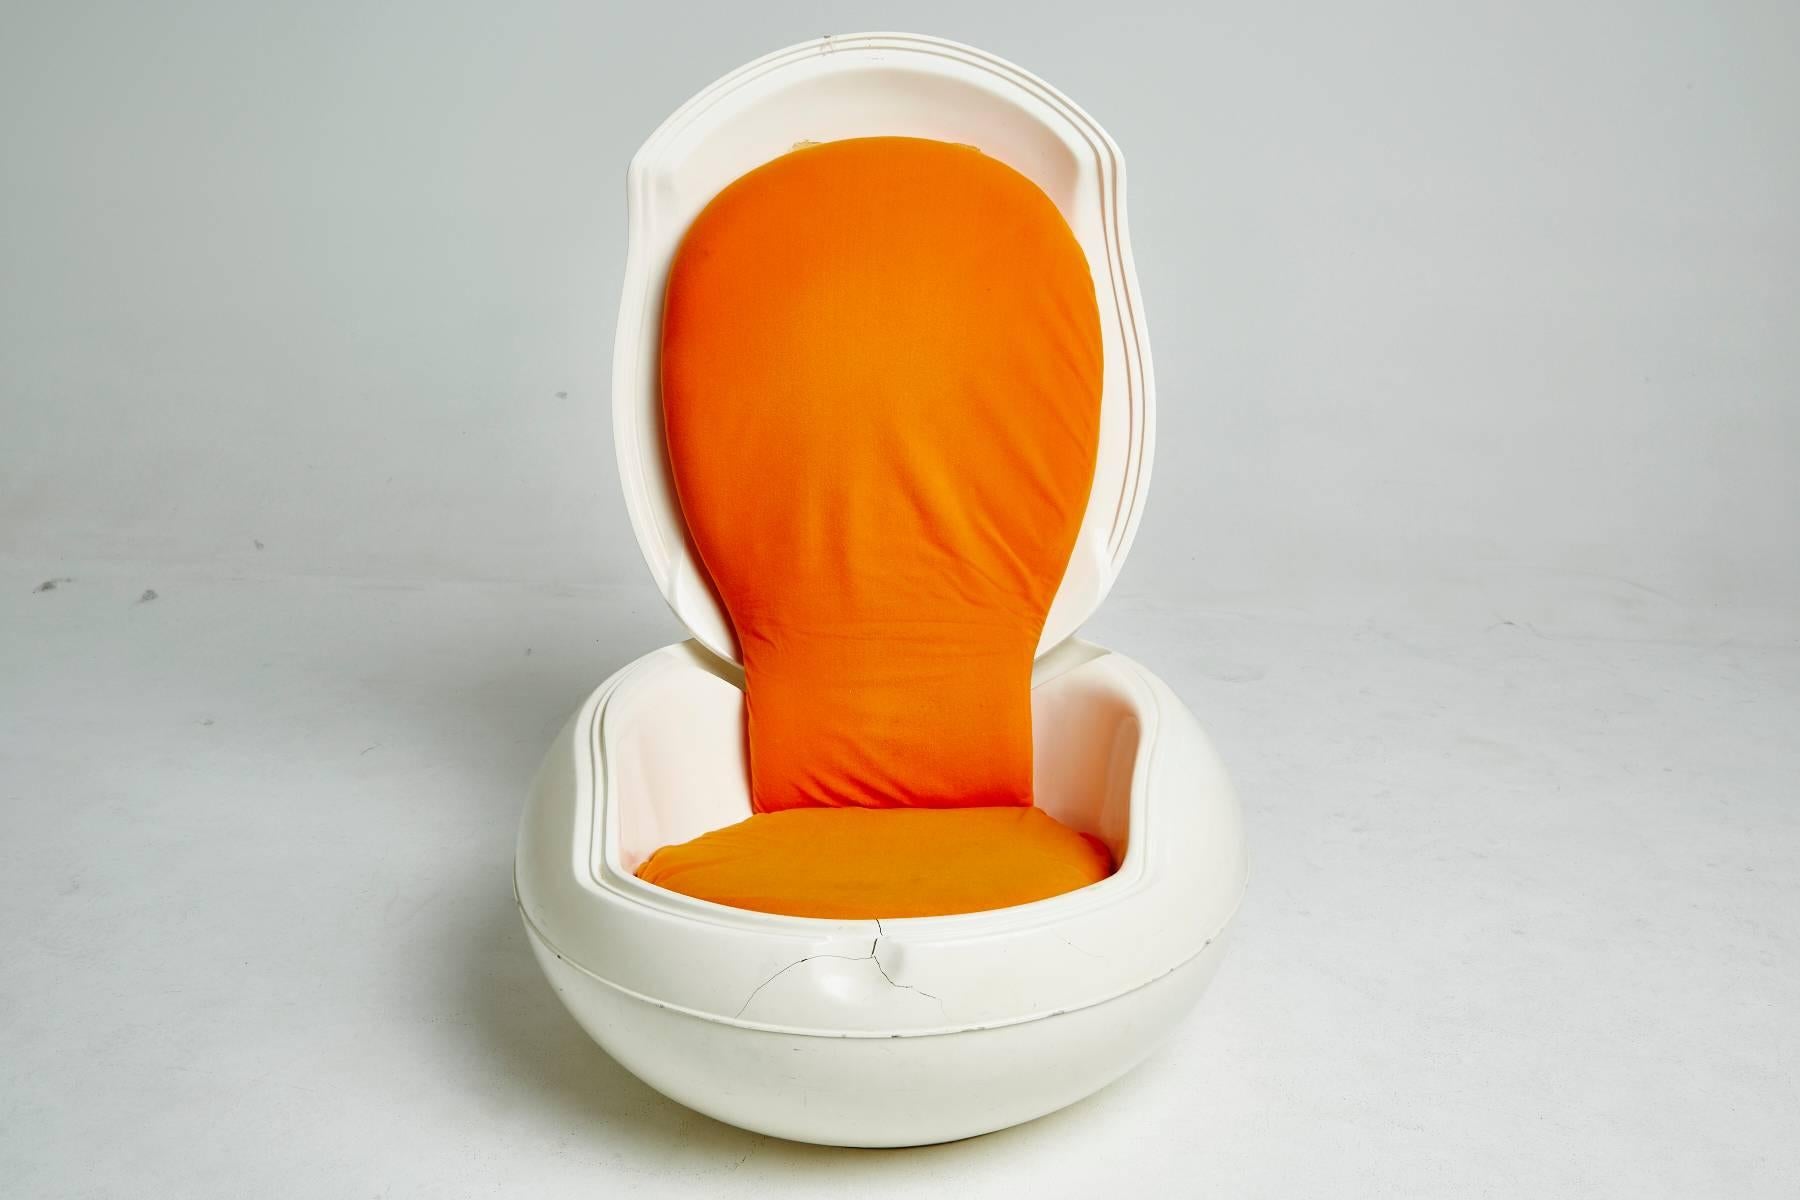 This iconic garden Egg chair was created by Hungarian designer Peter Ghyczy in 1968 for Rheuter products. When closed, the white polyurethane shell is a clean, round, egg-shaped dollop. Lift the lid to reveal a hidden low lounge chair with a tall